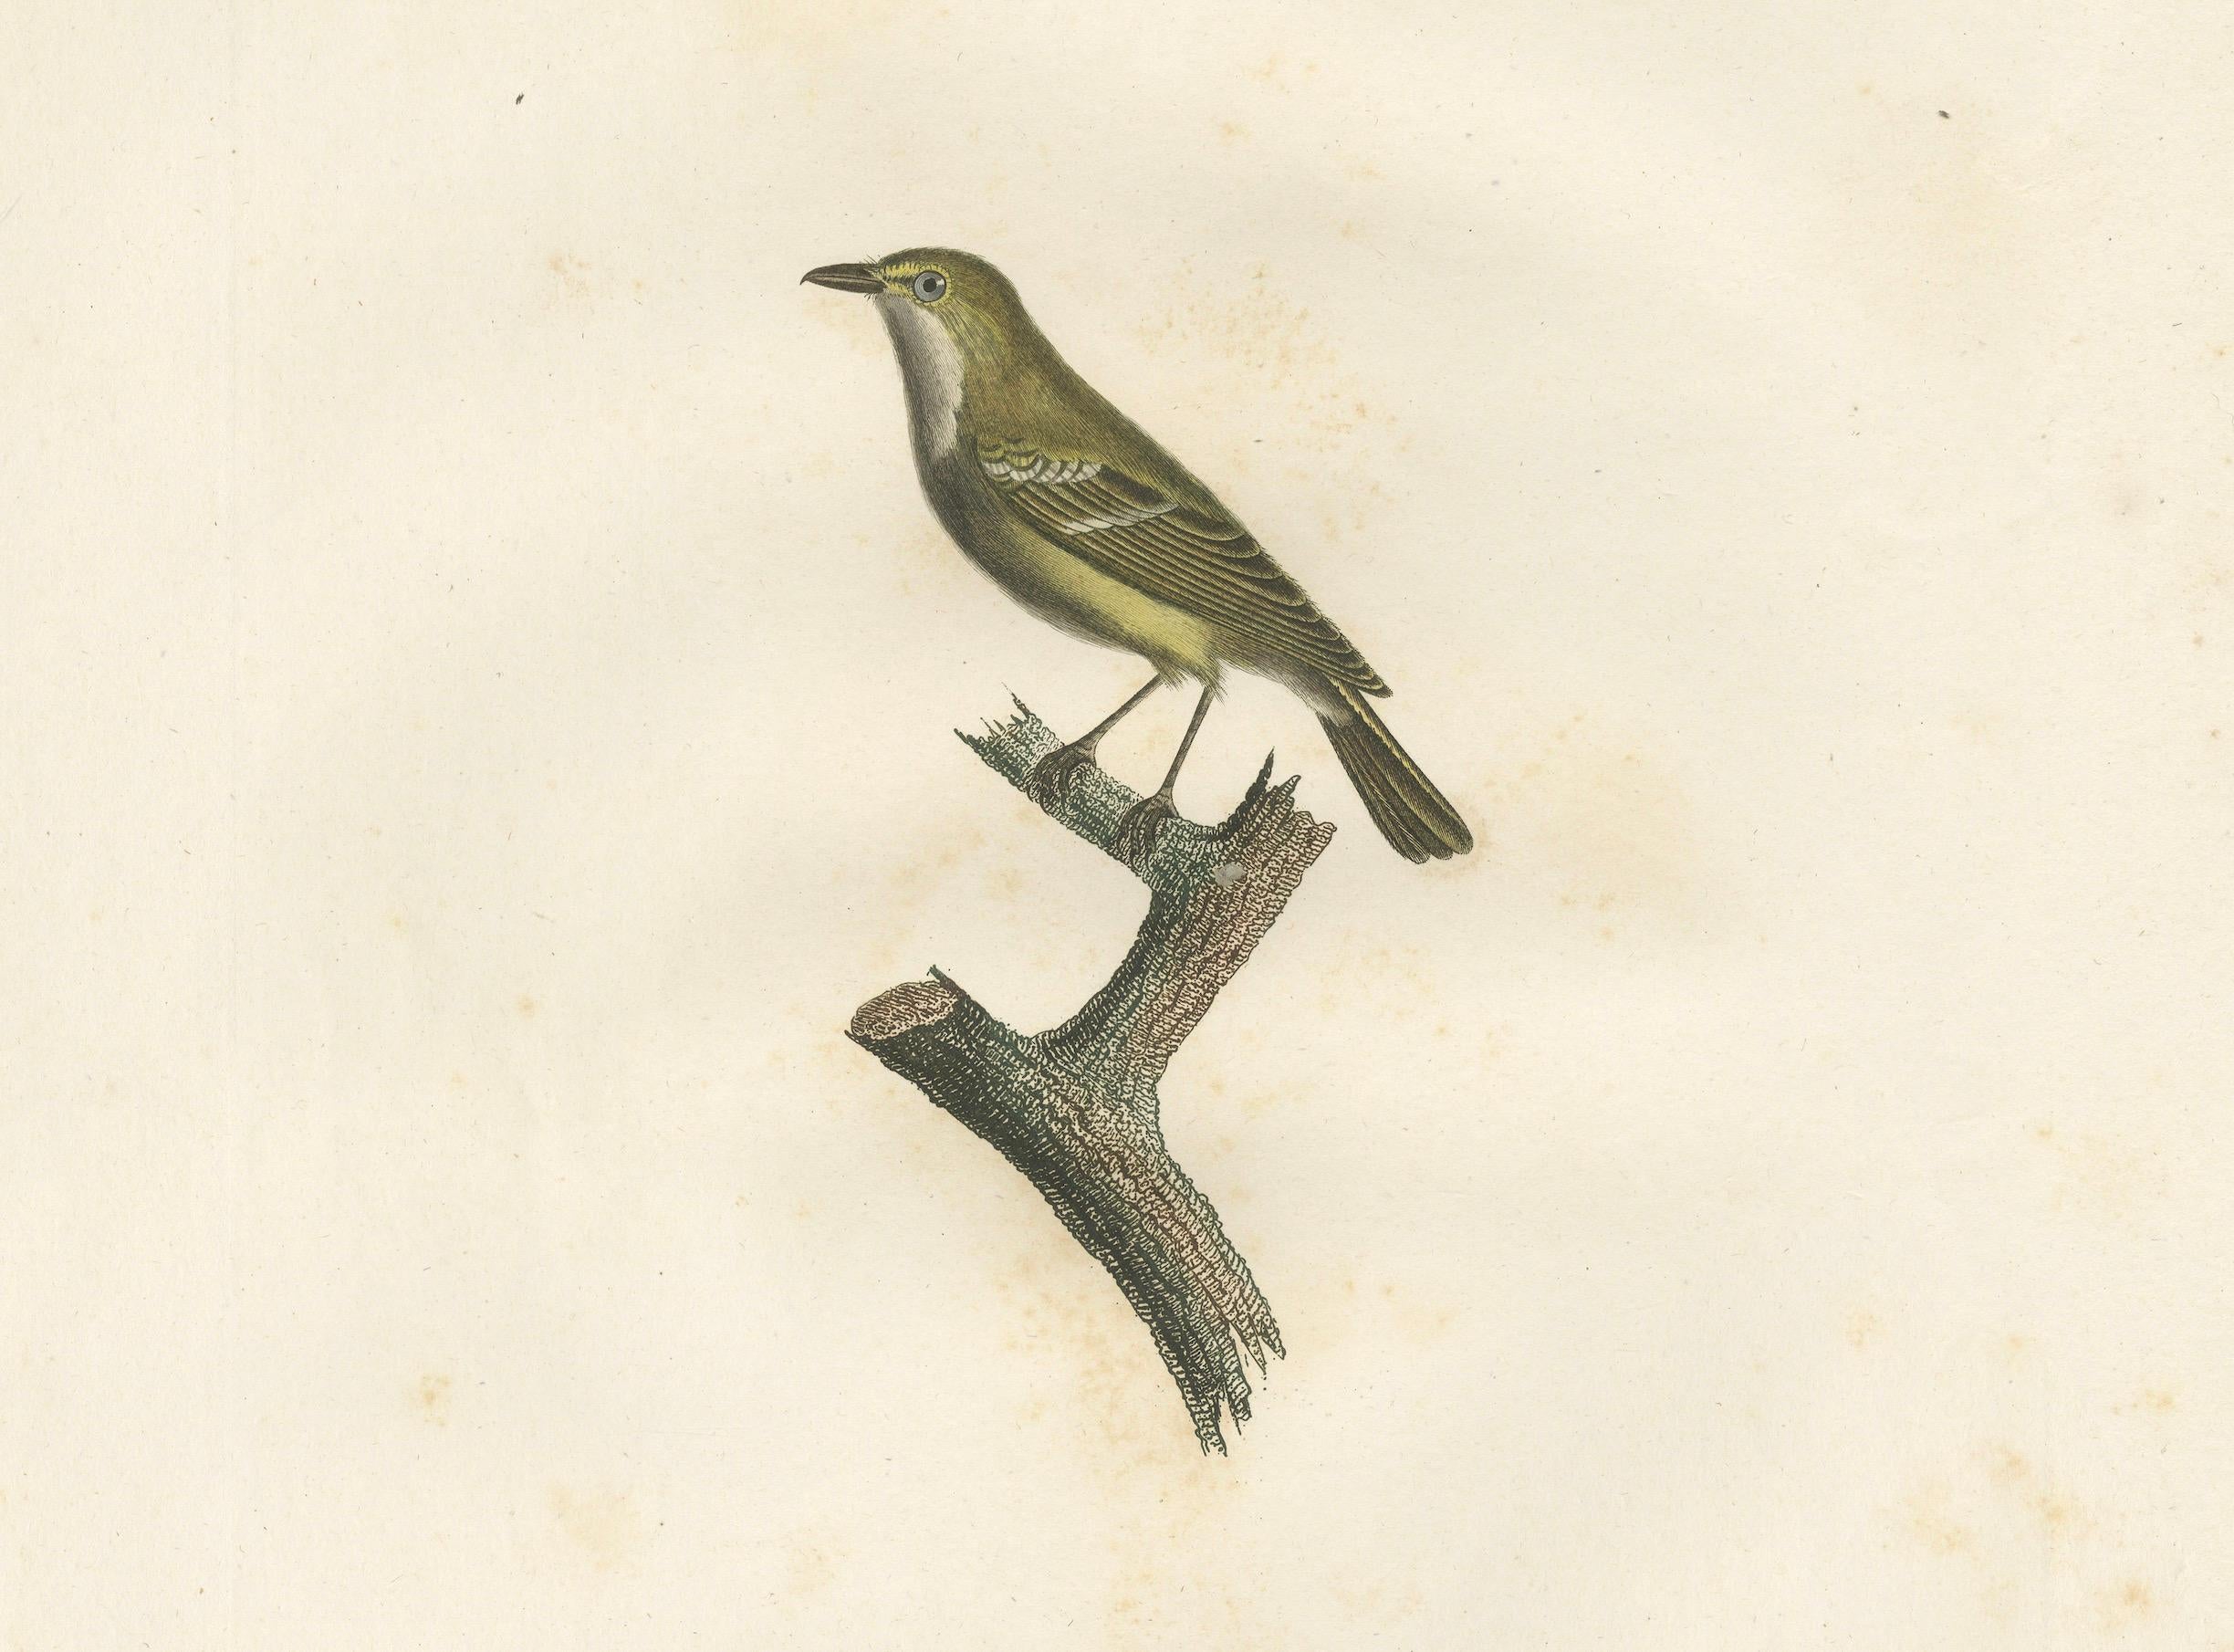 Large Antique Vireo Bird Illustration - 1807 Vieillot Handcolored Print For Sale 1